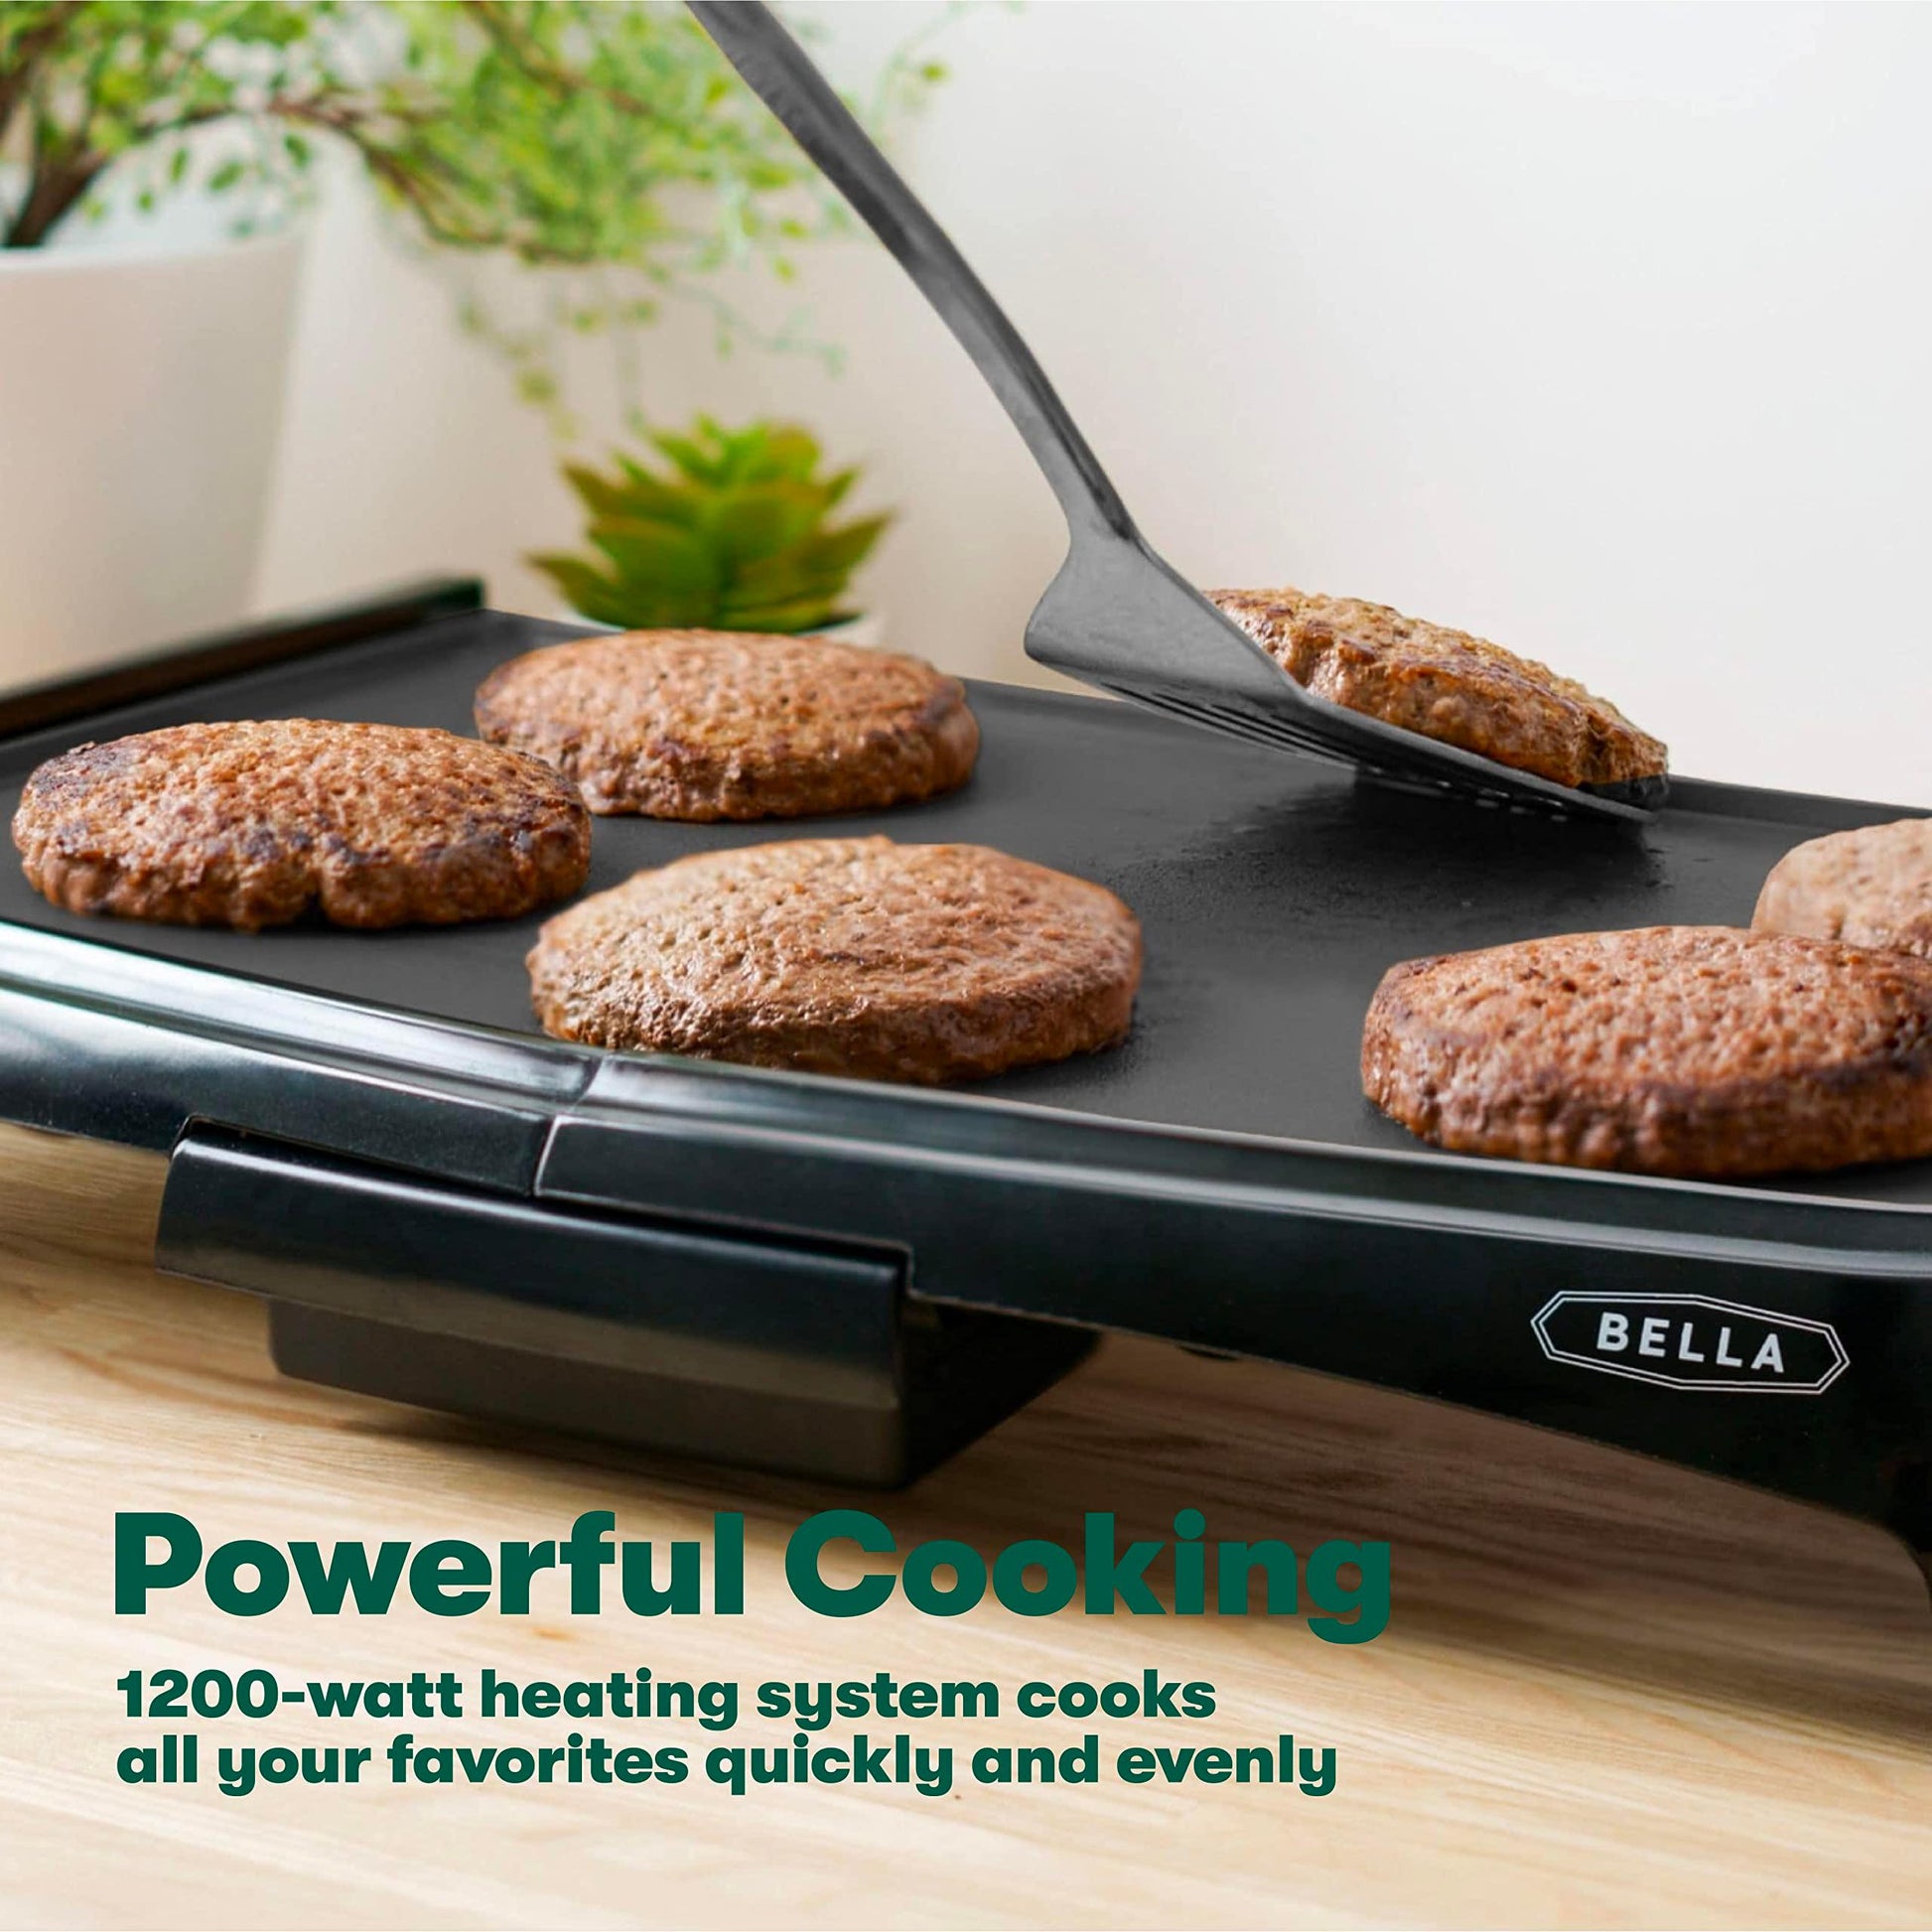 BELLA Electric Griddle with Crumb Tray - Smokeless Indoor Grill, Nonstick Surface, Adjustable Temperature Control Dial & Cool-touch Handles, 10" x 16", Black - CookCave